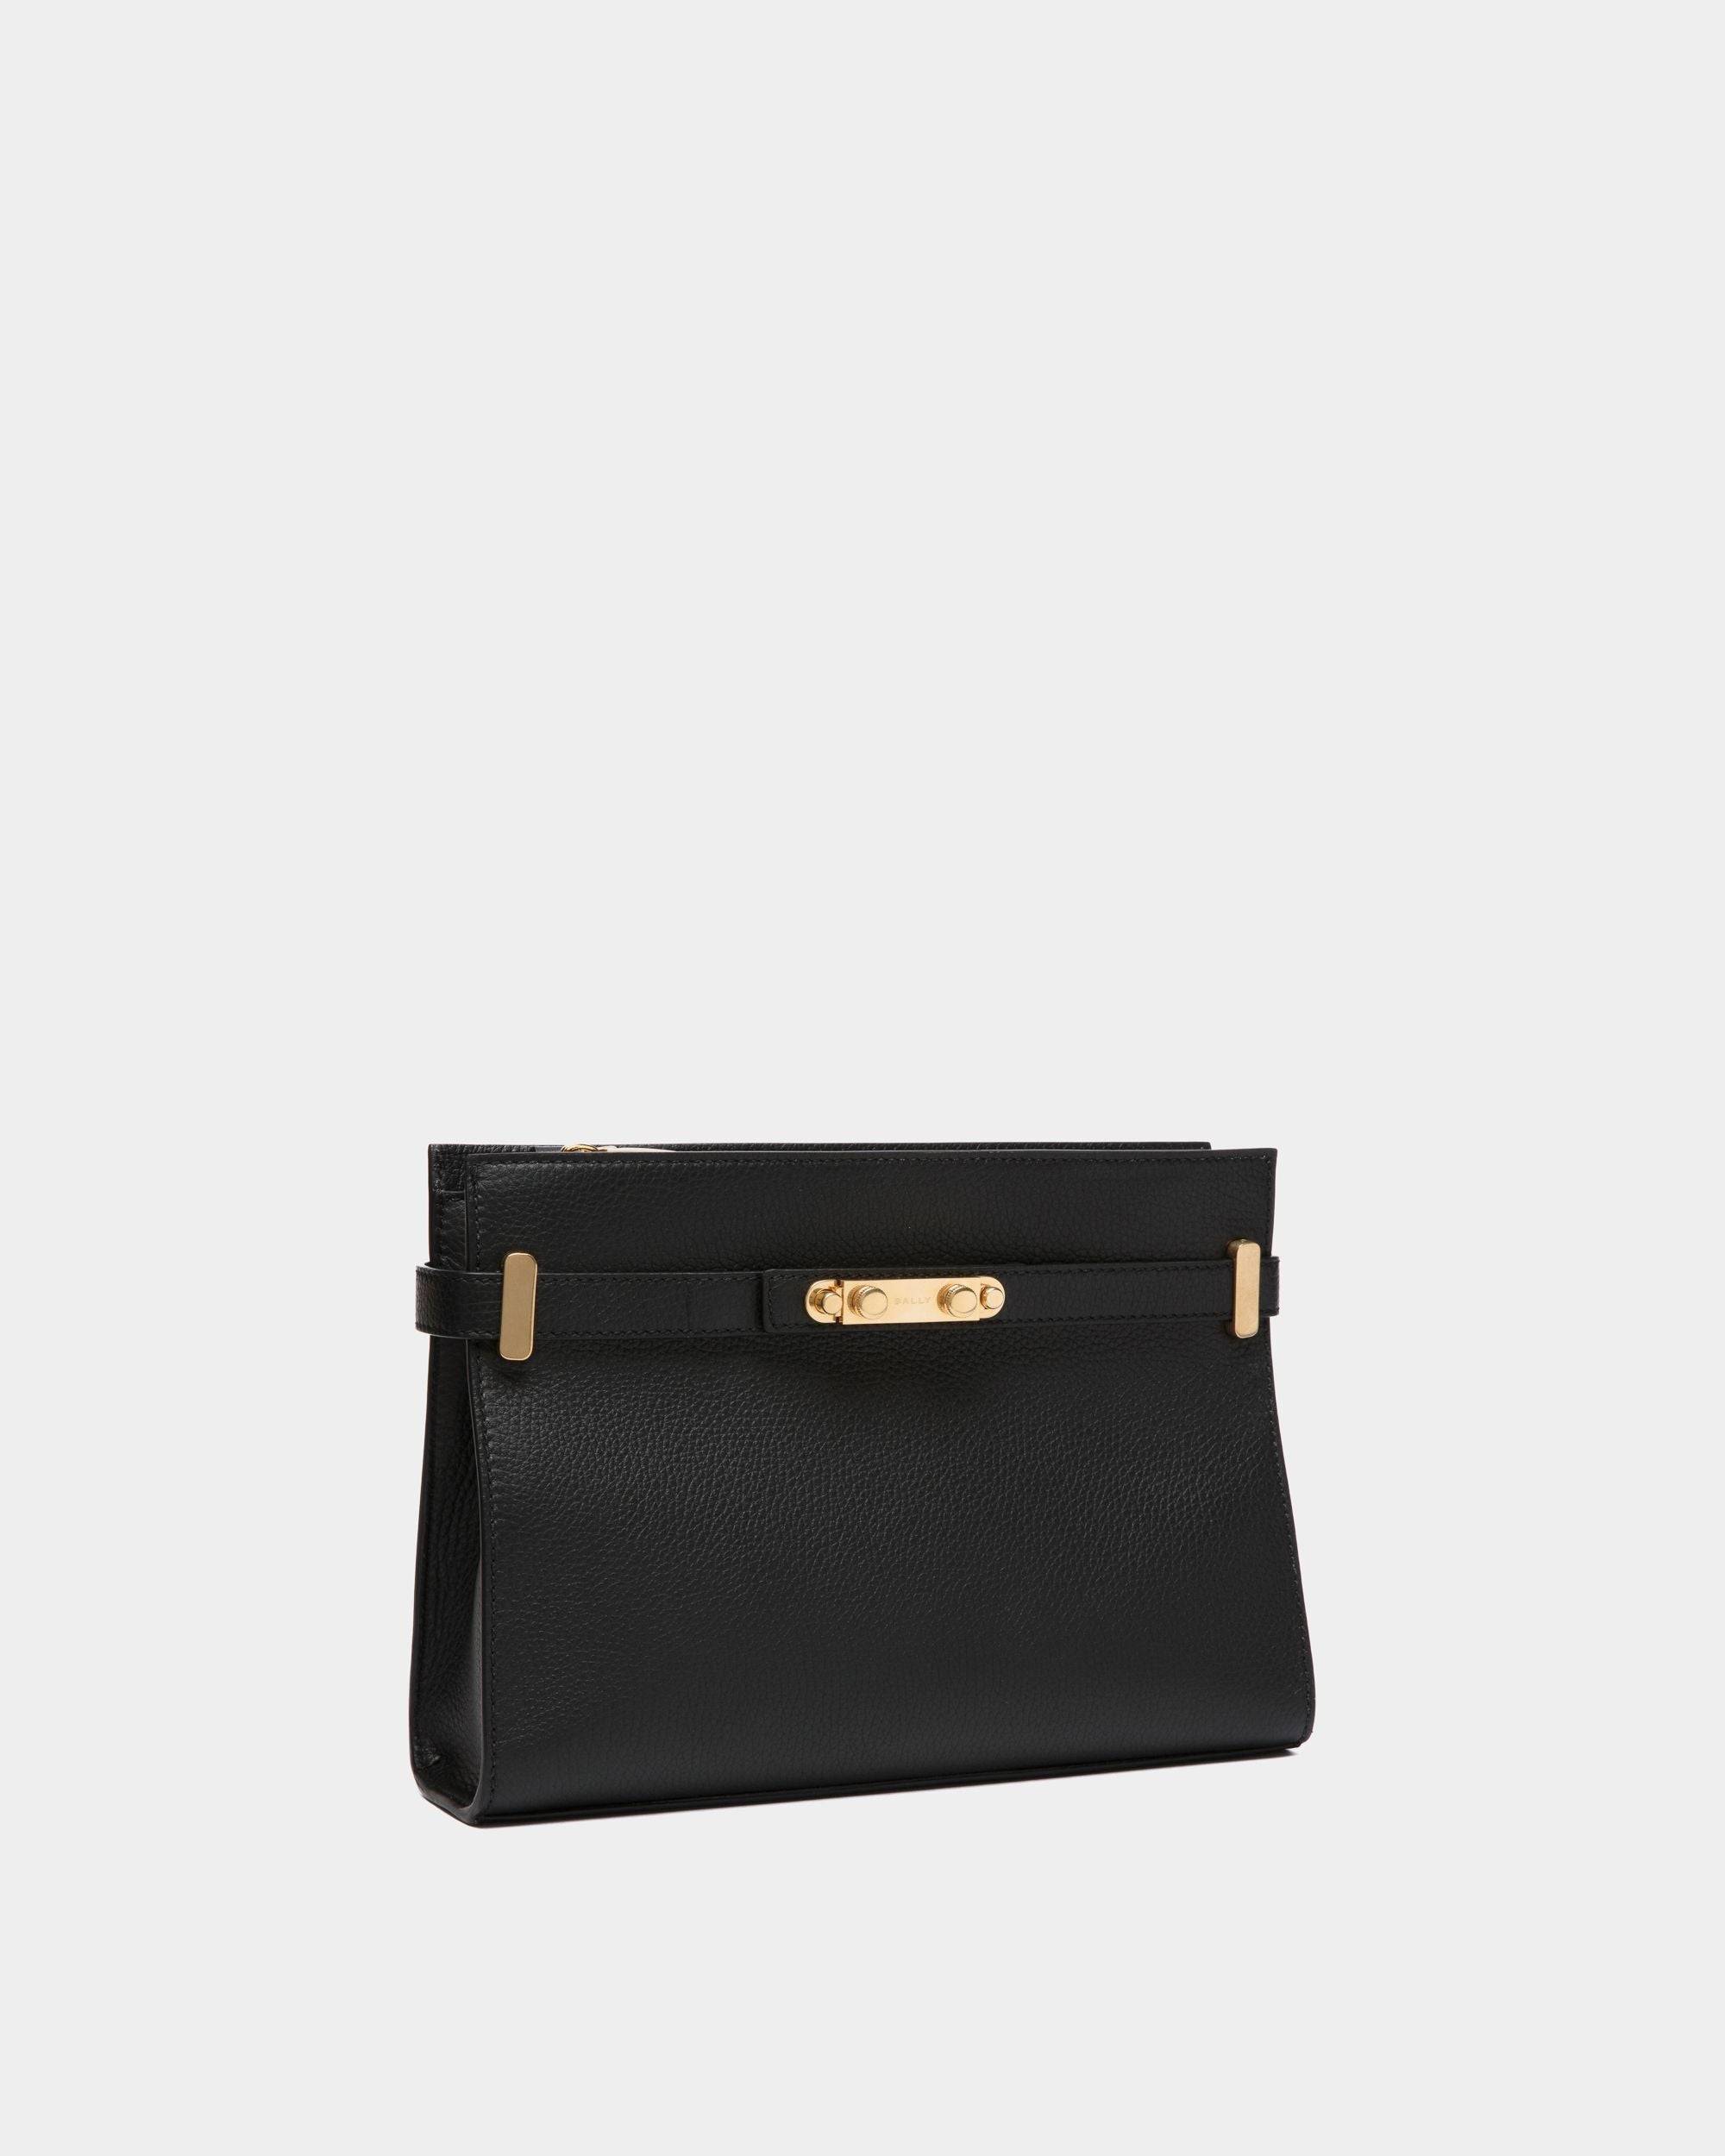 Carriage | Women's Shoulder Bag in Black Grained Leather | Bally | Still Life 3/4 Front